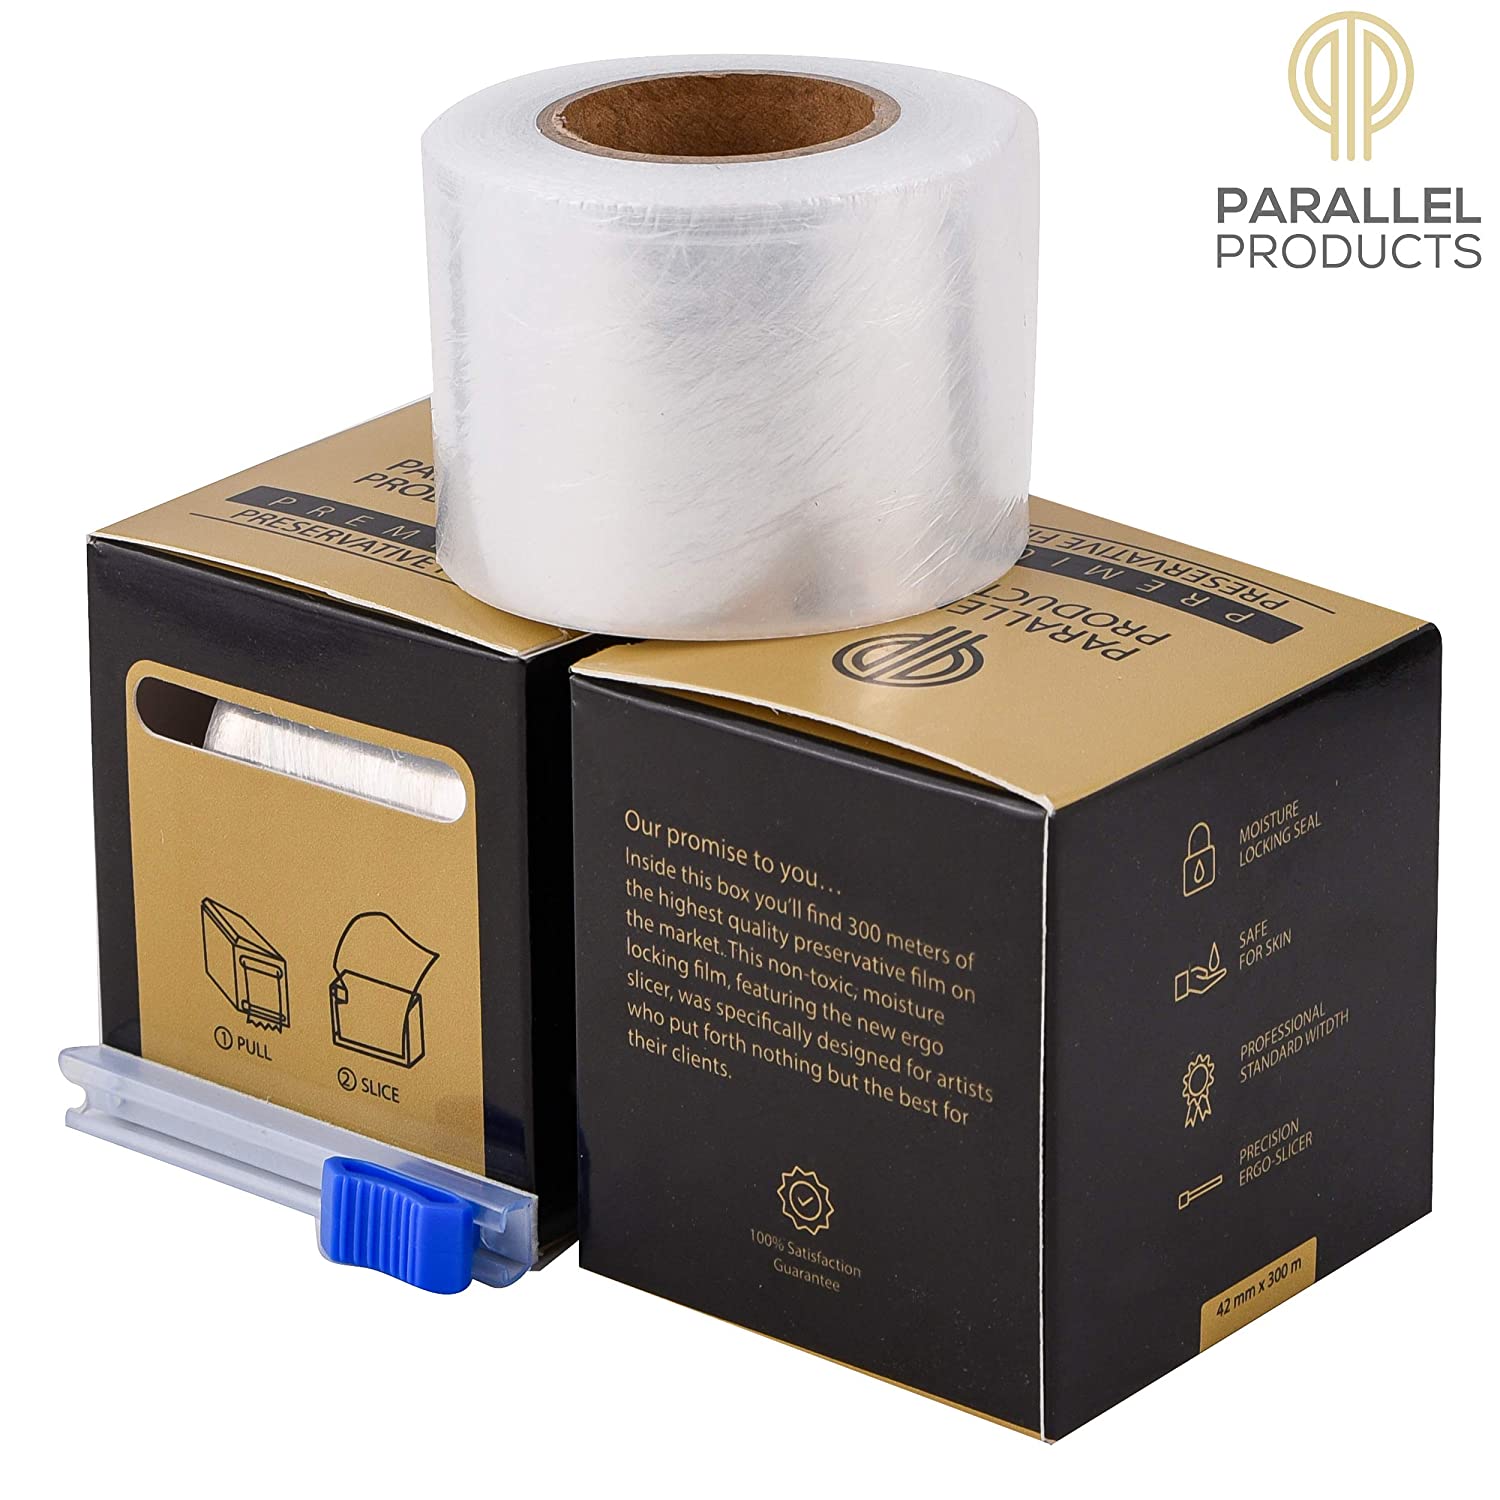 Parallel Products Premium Preservative Film Professional Grade Plastic Film for Permanent and Semi-Permanent Makeup with Precision Ergo-Slicer 300 meters Front and Back